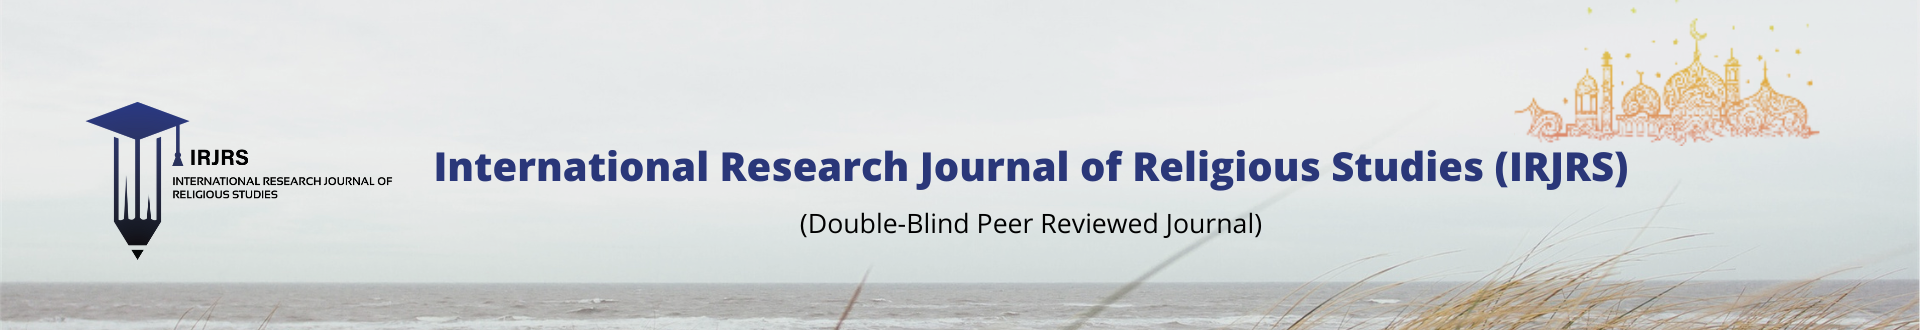 International Research Journal of Religious Studies